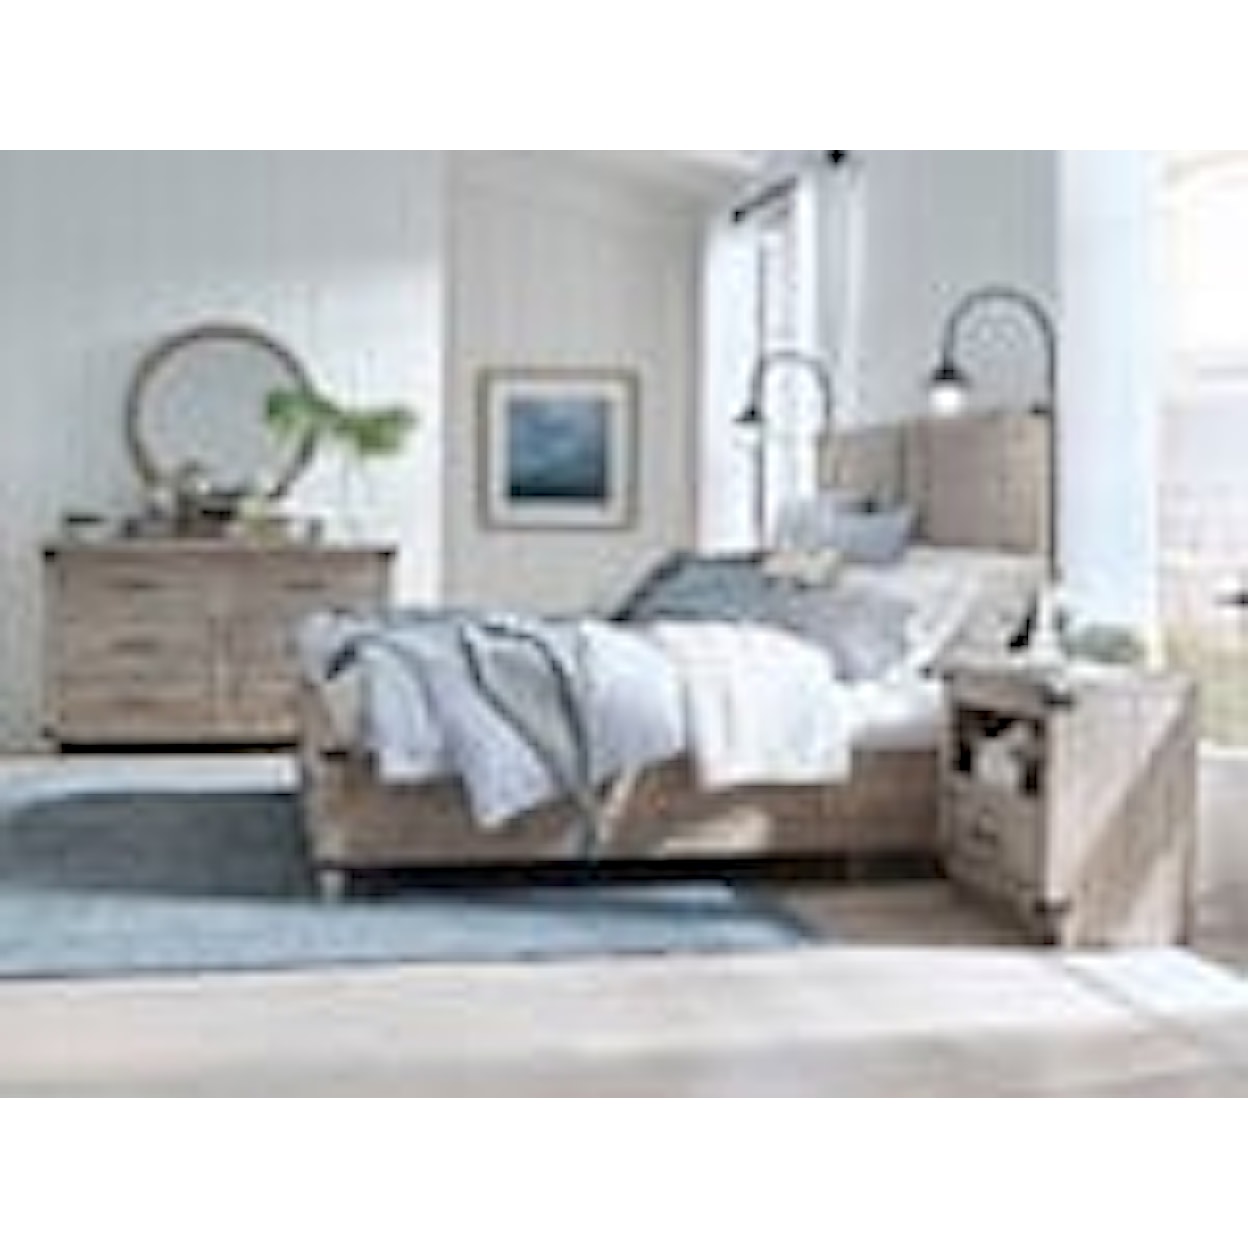 Aspenhome Foundry King Storage Panel Bed